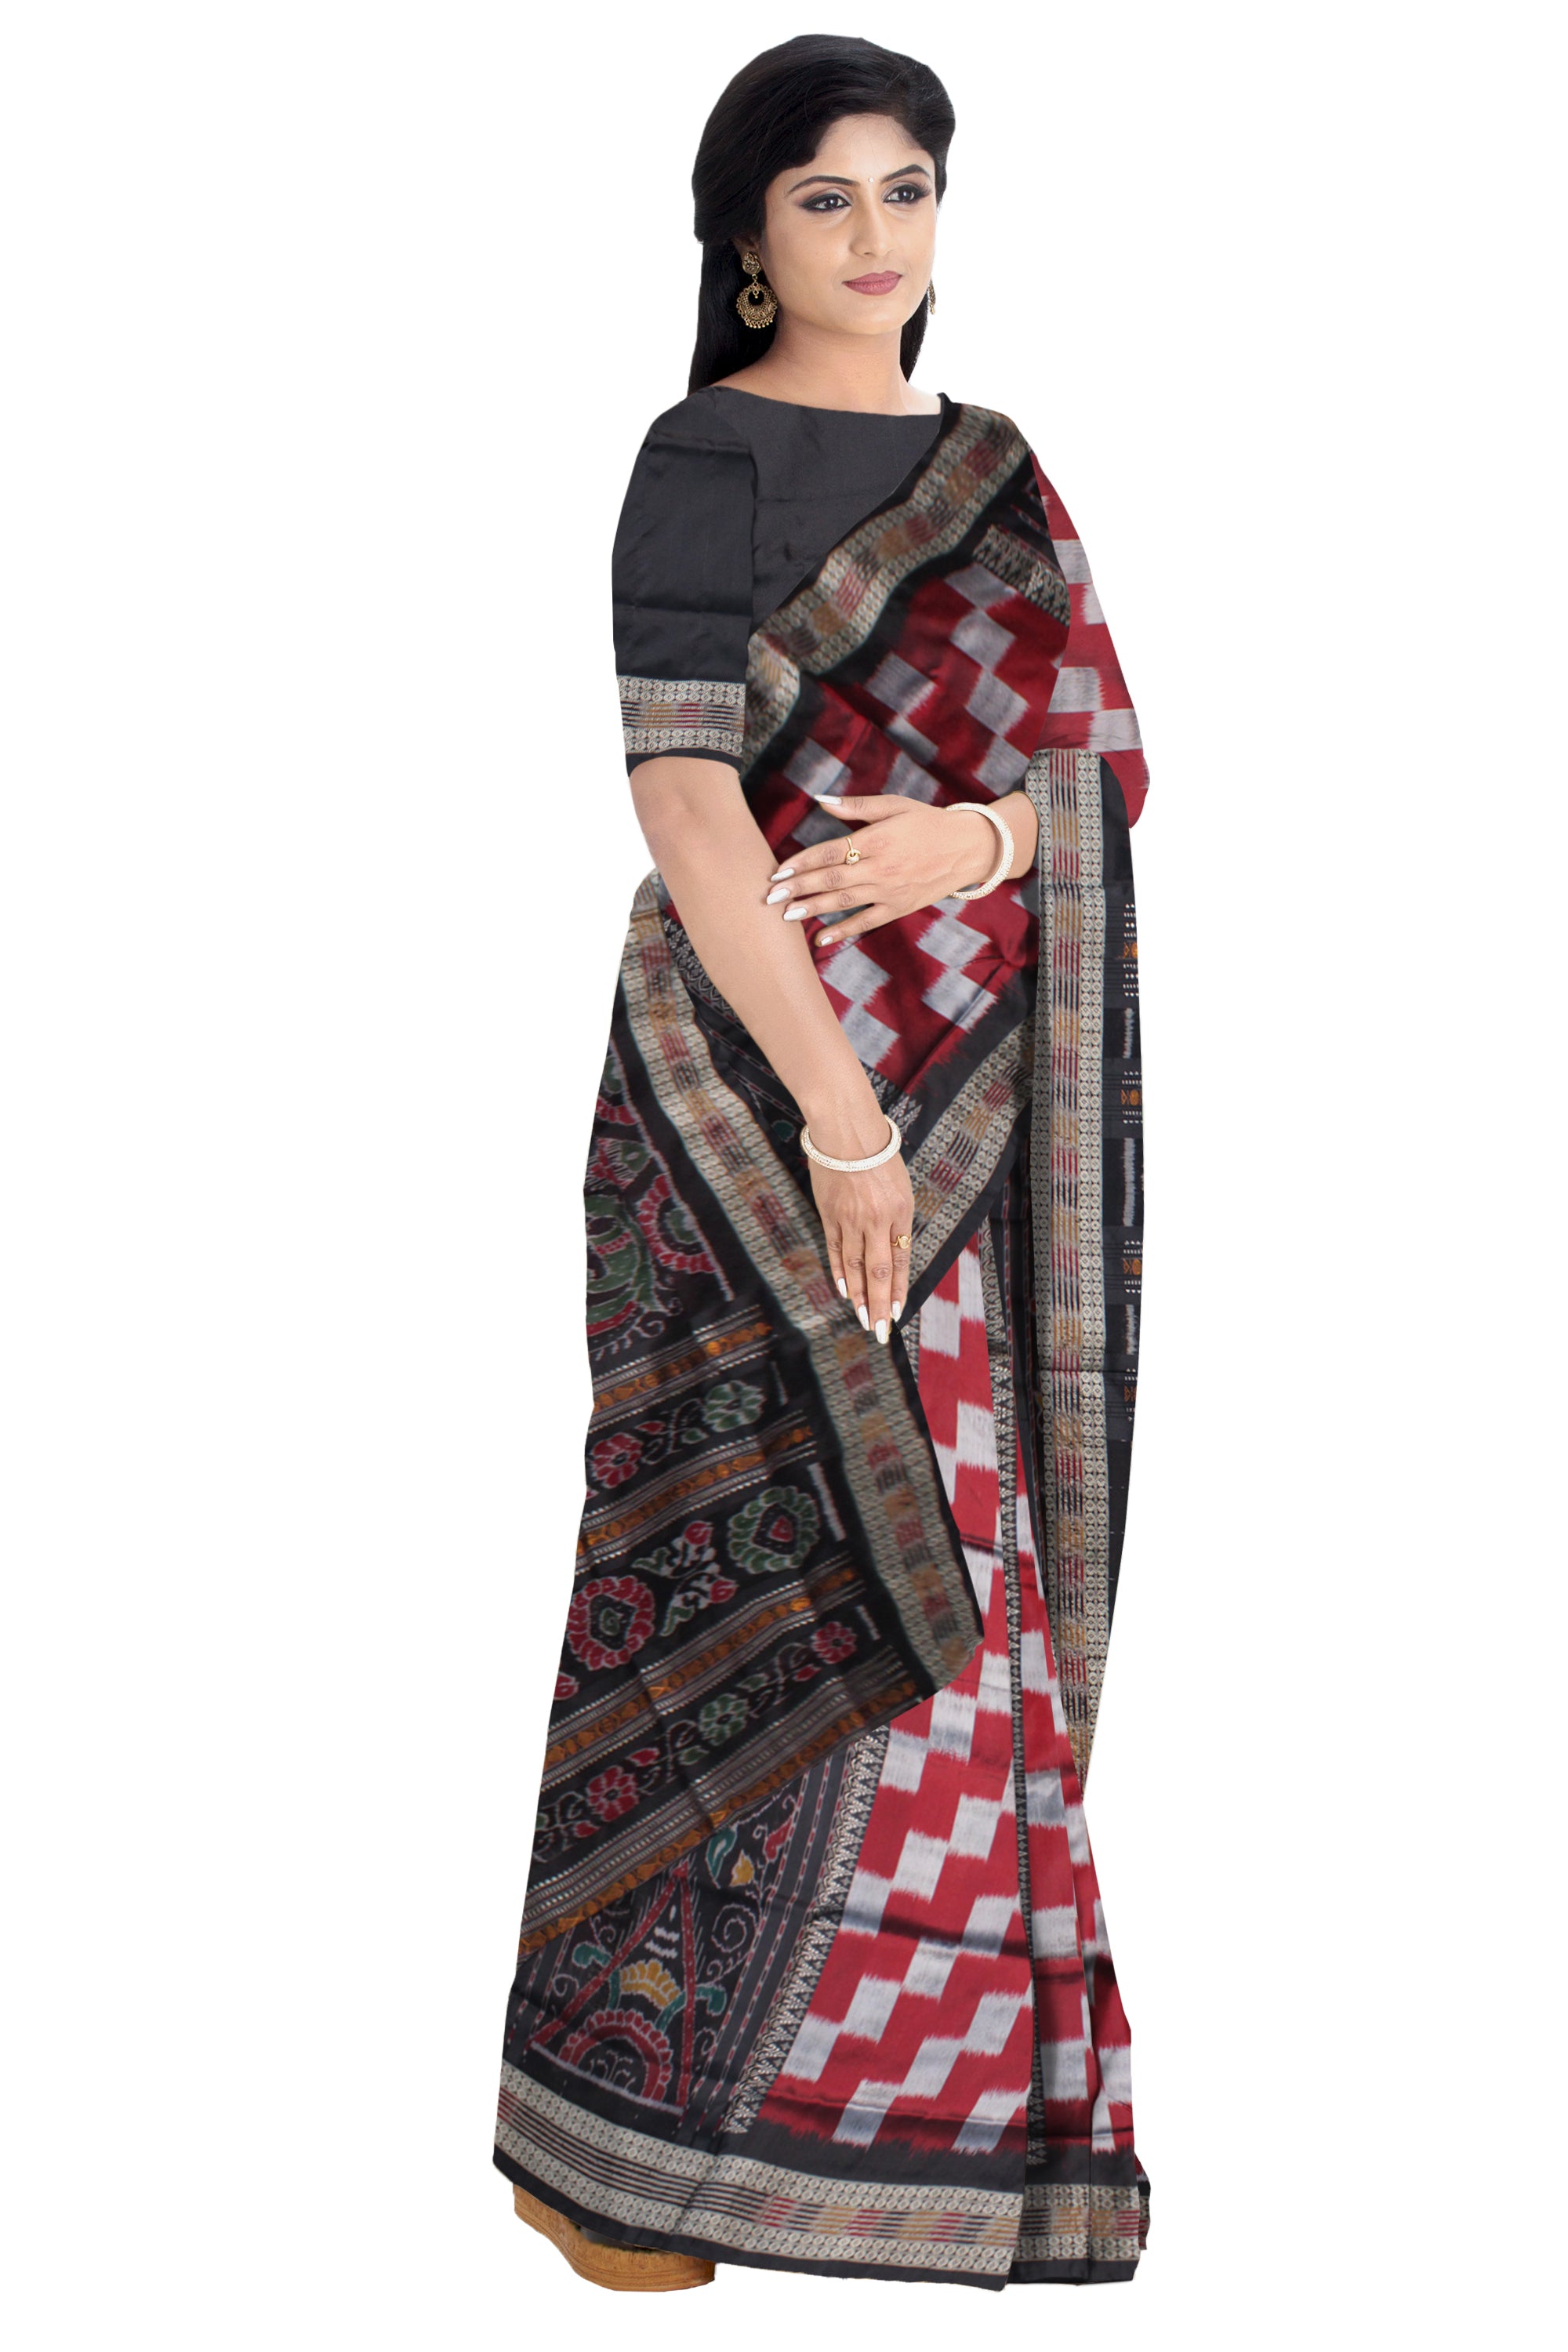 NEW TRADITIONAL LOOK PERE PERE BANDHA WITH BOMKEI PATTERN SAREE WITH BLACK COLOR BLOUSE. - Koshali Arts & Crafts Enterprise